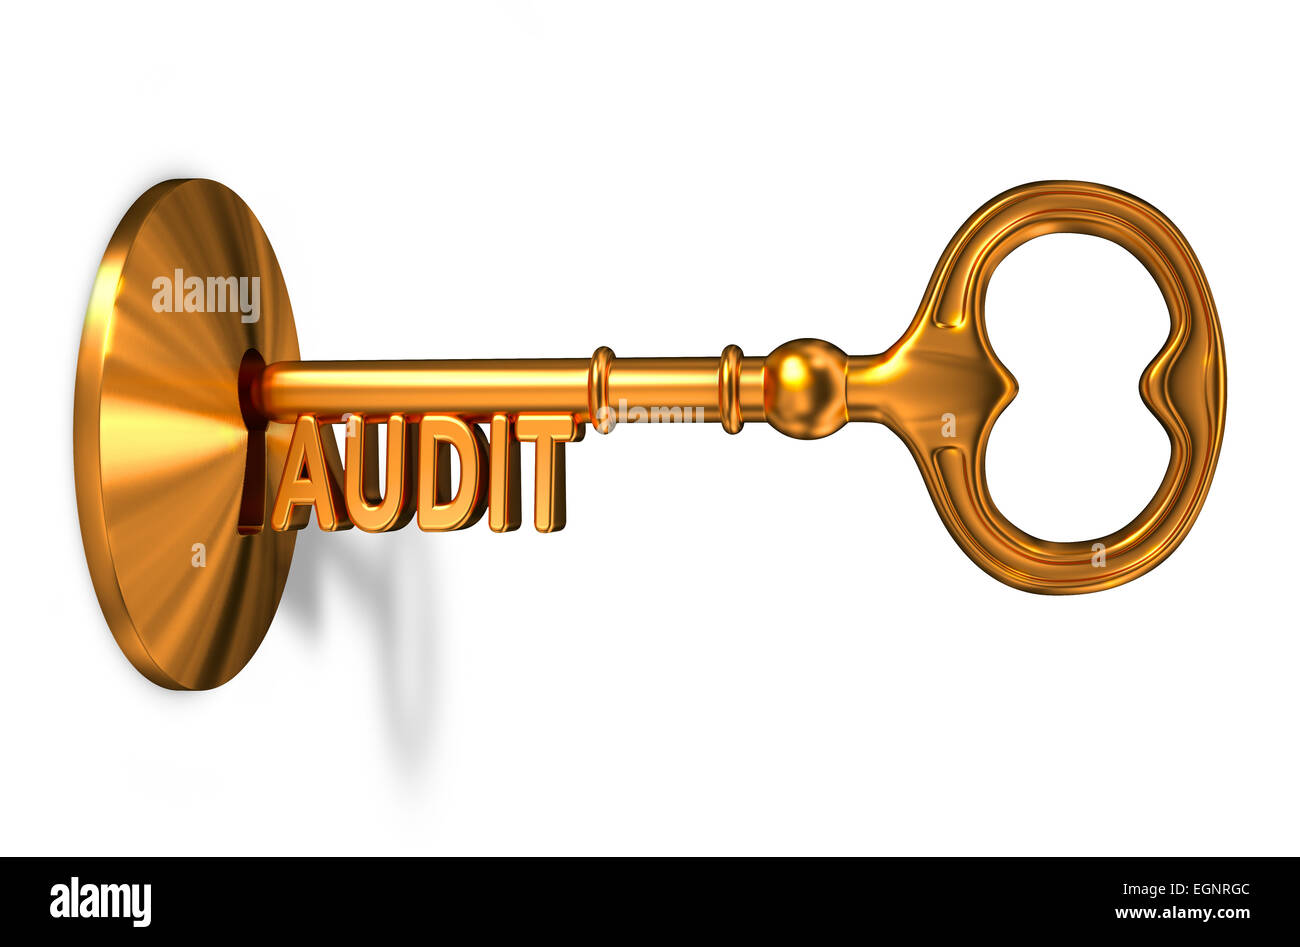 Audit - Golden Key is Inserted into the Keyhole. Stock Photo